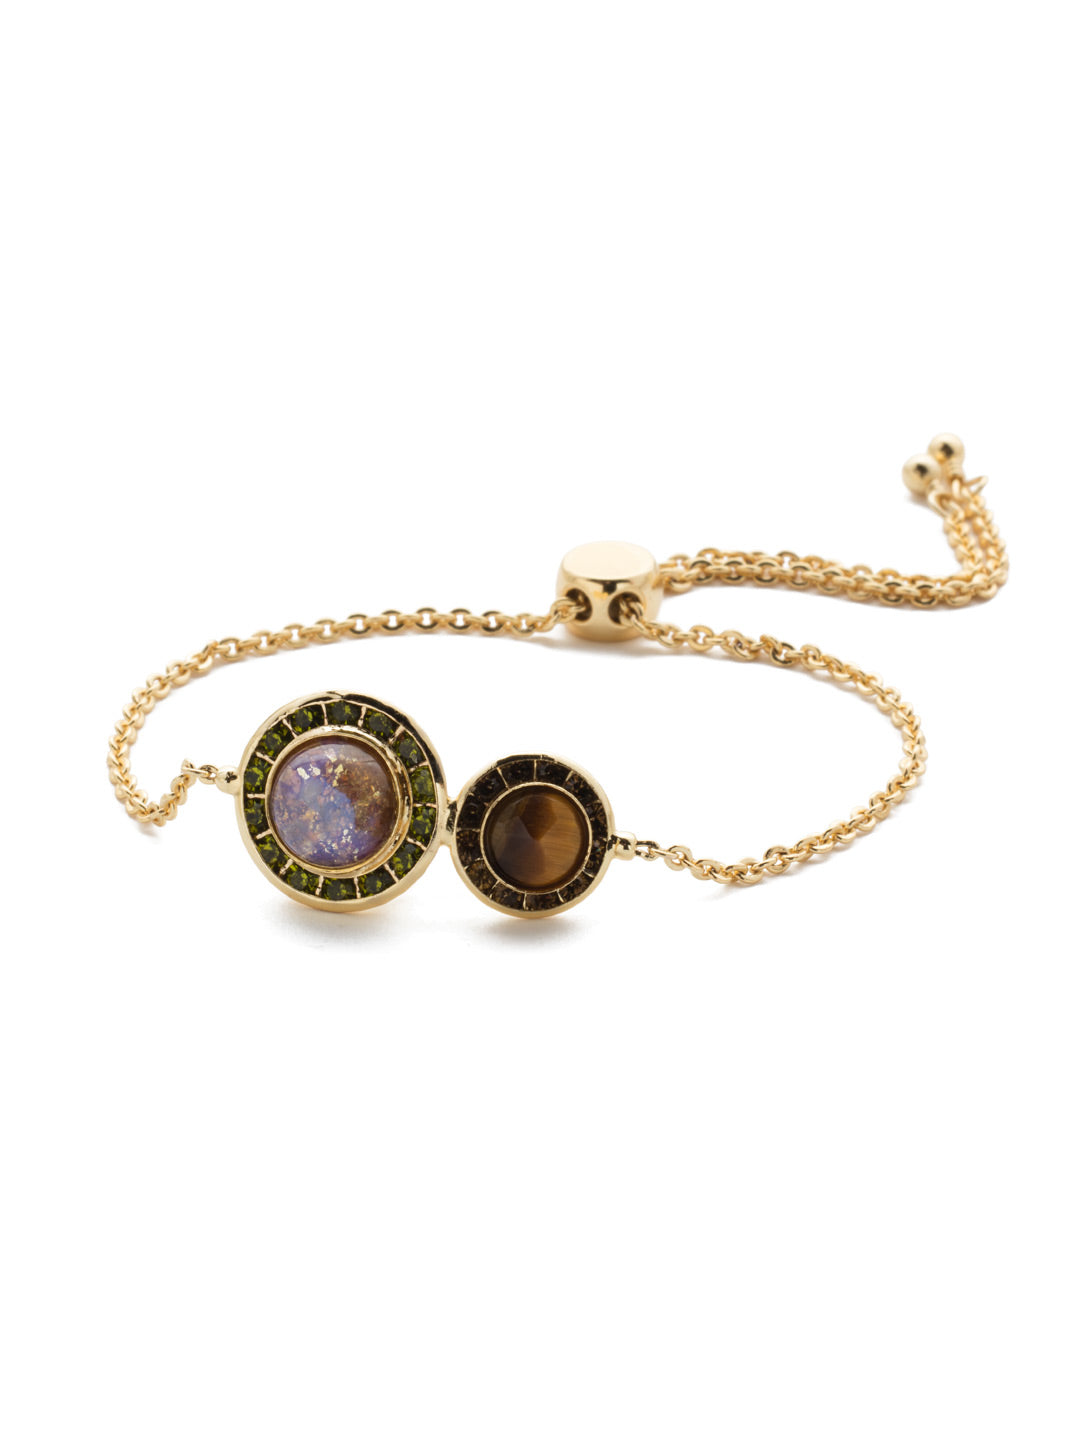 Hartford Slider Bracelet - BET13BGCSM - For an understated antique look, you have to add the Hartford Slider Bracelet to your collection. It adjusts to size, making it perfect slipping it on any day, with any outfit. From Sorrelli's Cashmere collection in our Bright Gold-tone finish.